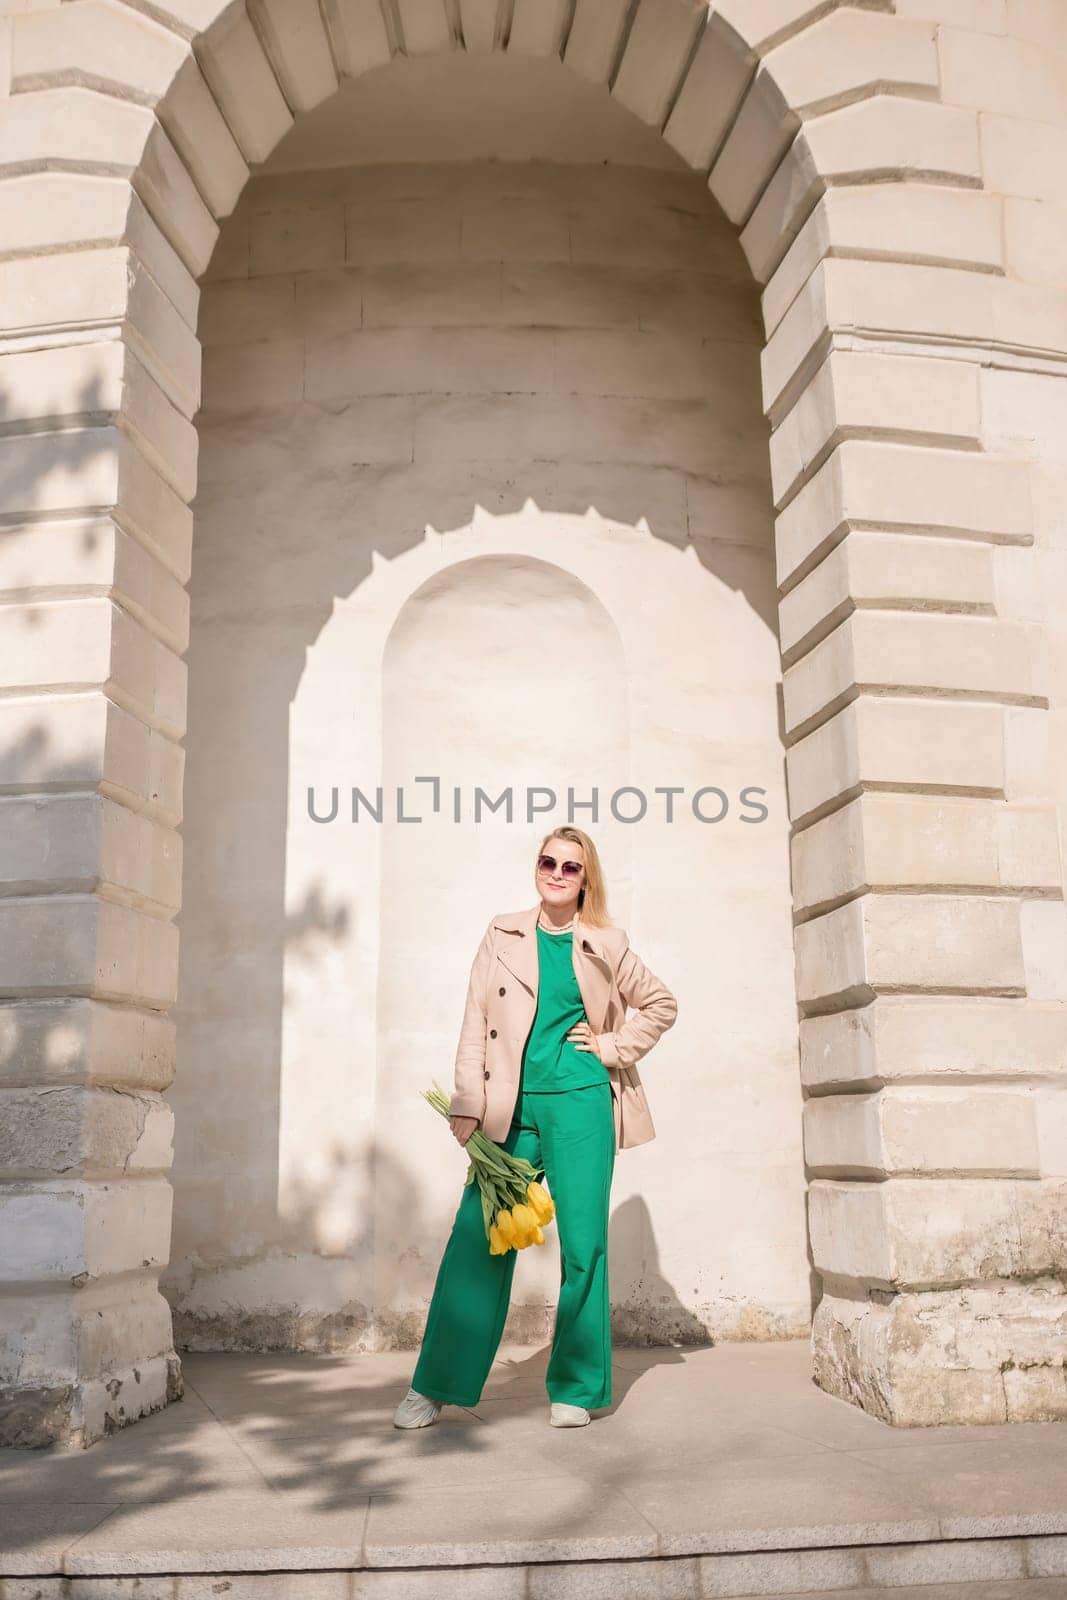 A woman is standing in front of a building with a yellow flower in her hand. She is wearing a green dress and a tan coat. by Matiunina